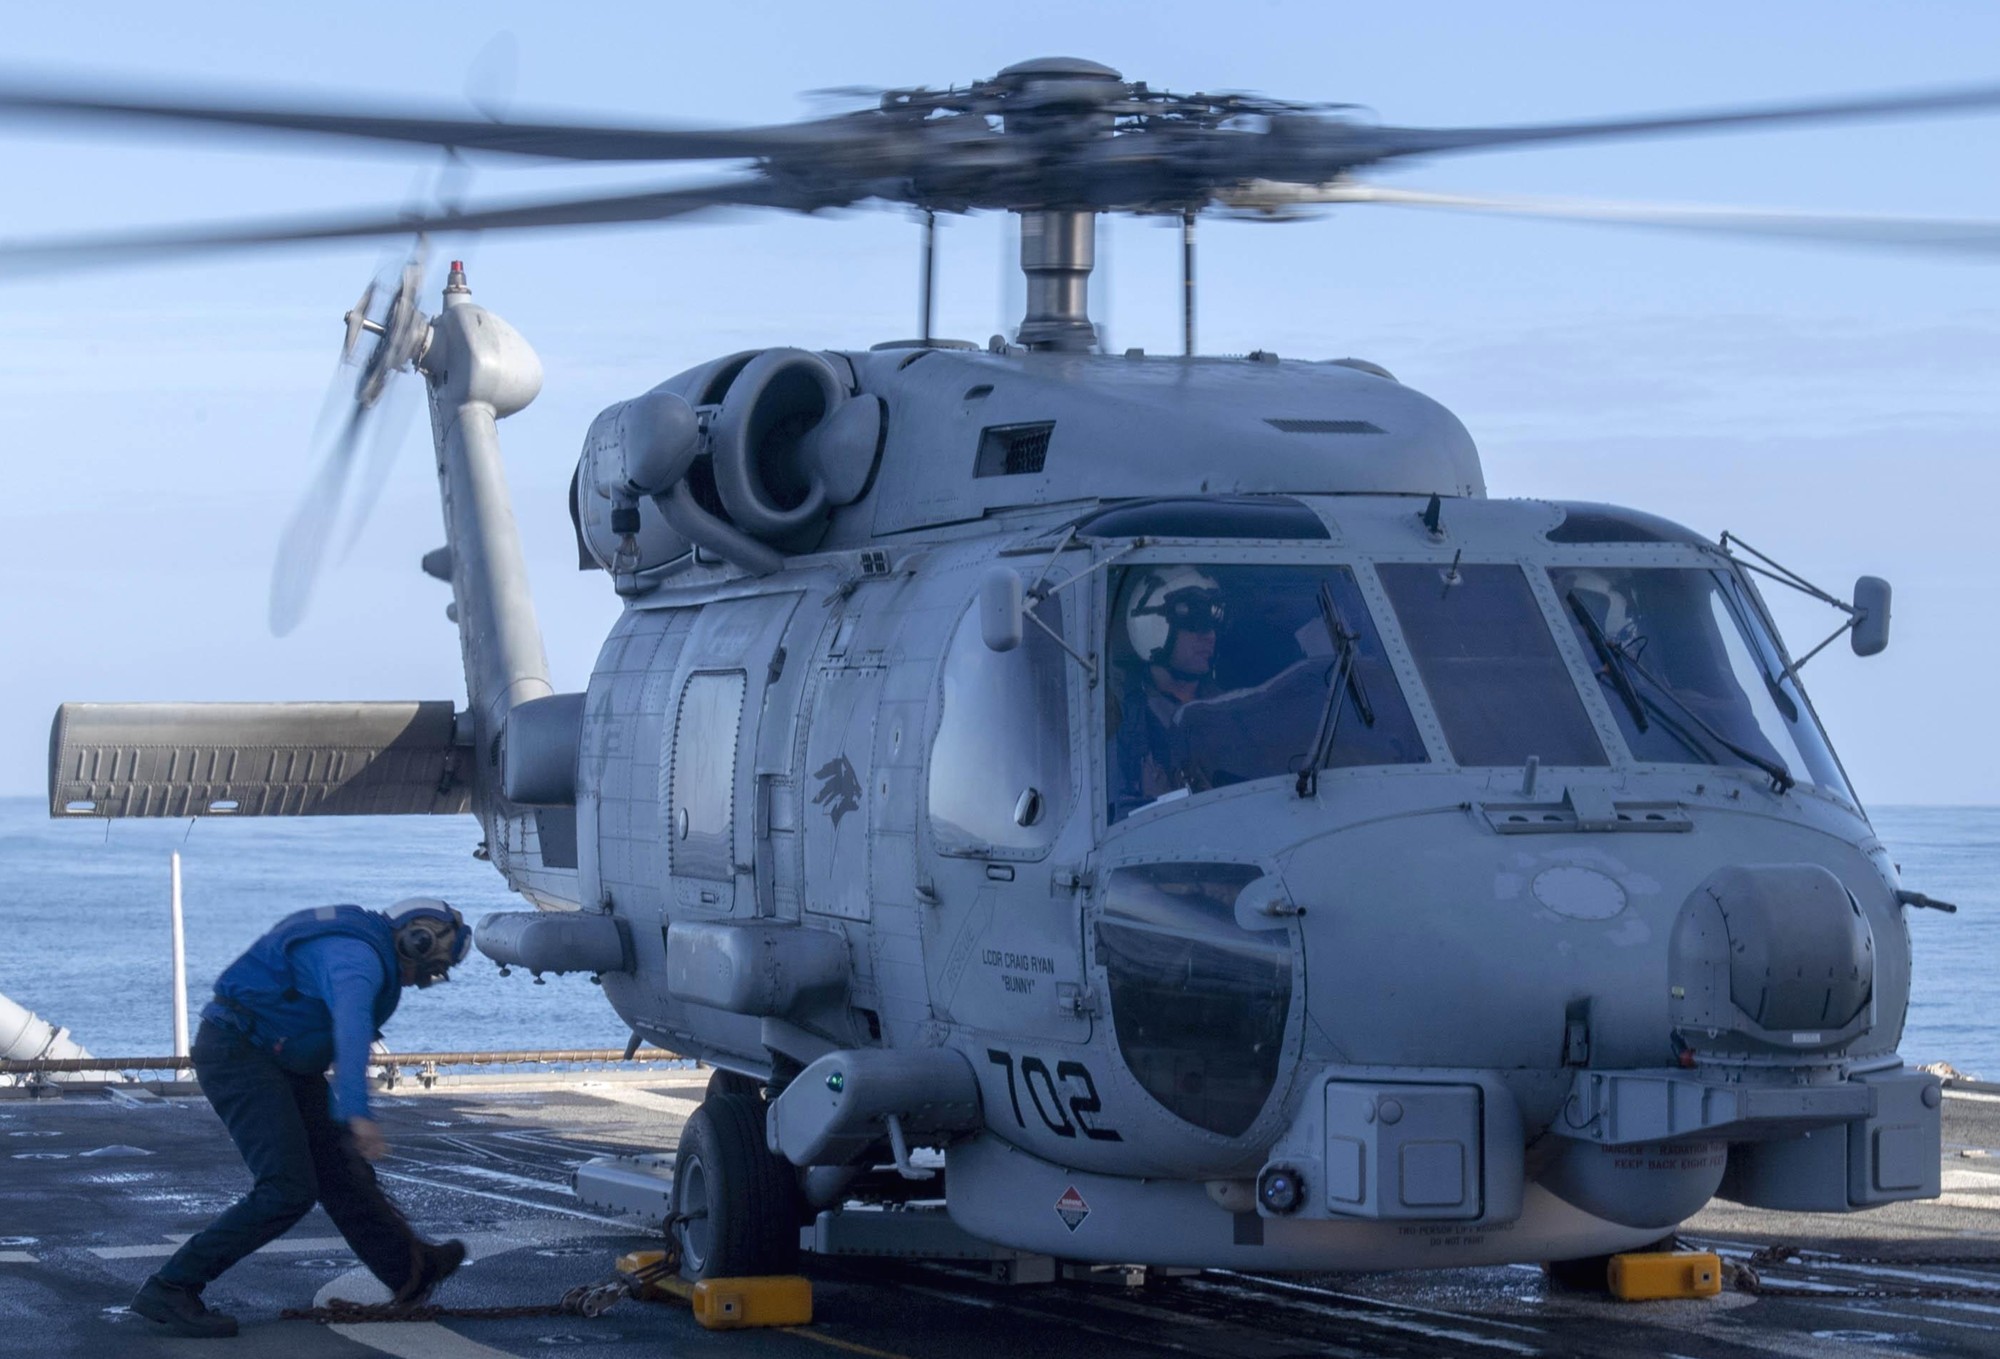 hsm-75 wolfpack helicopter maritime strike squadron us navy mh-60r seahawk 2017 35 uss howard ddg-83